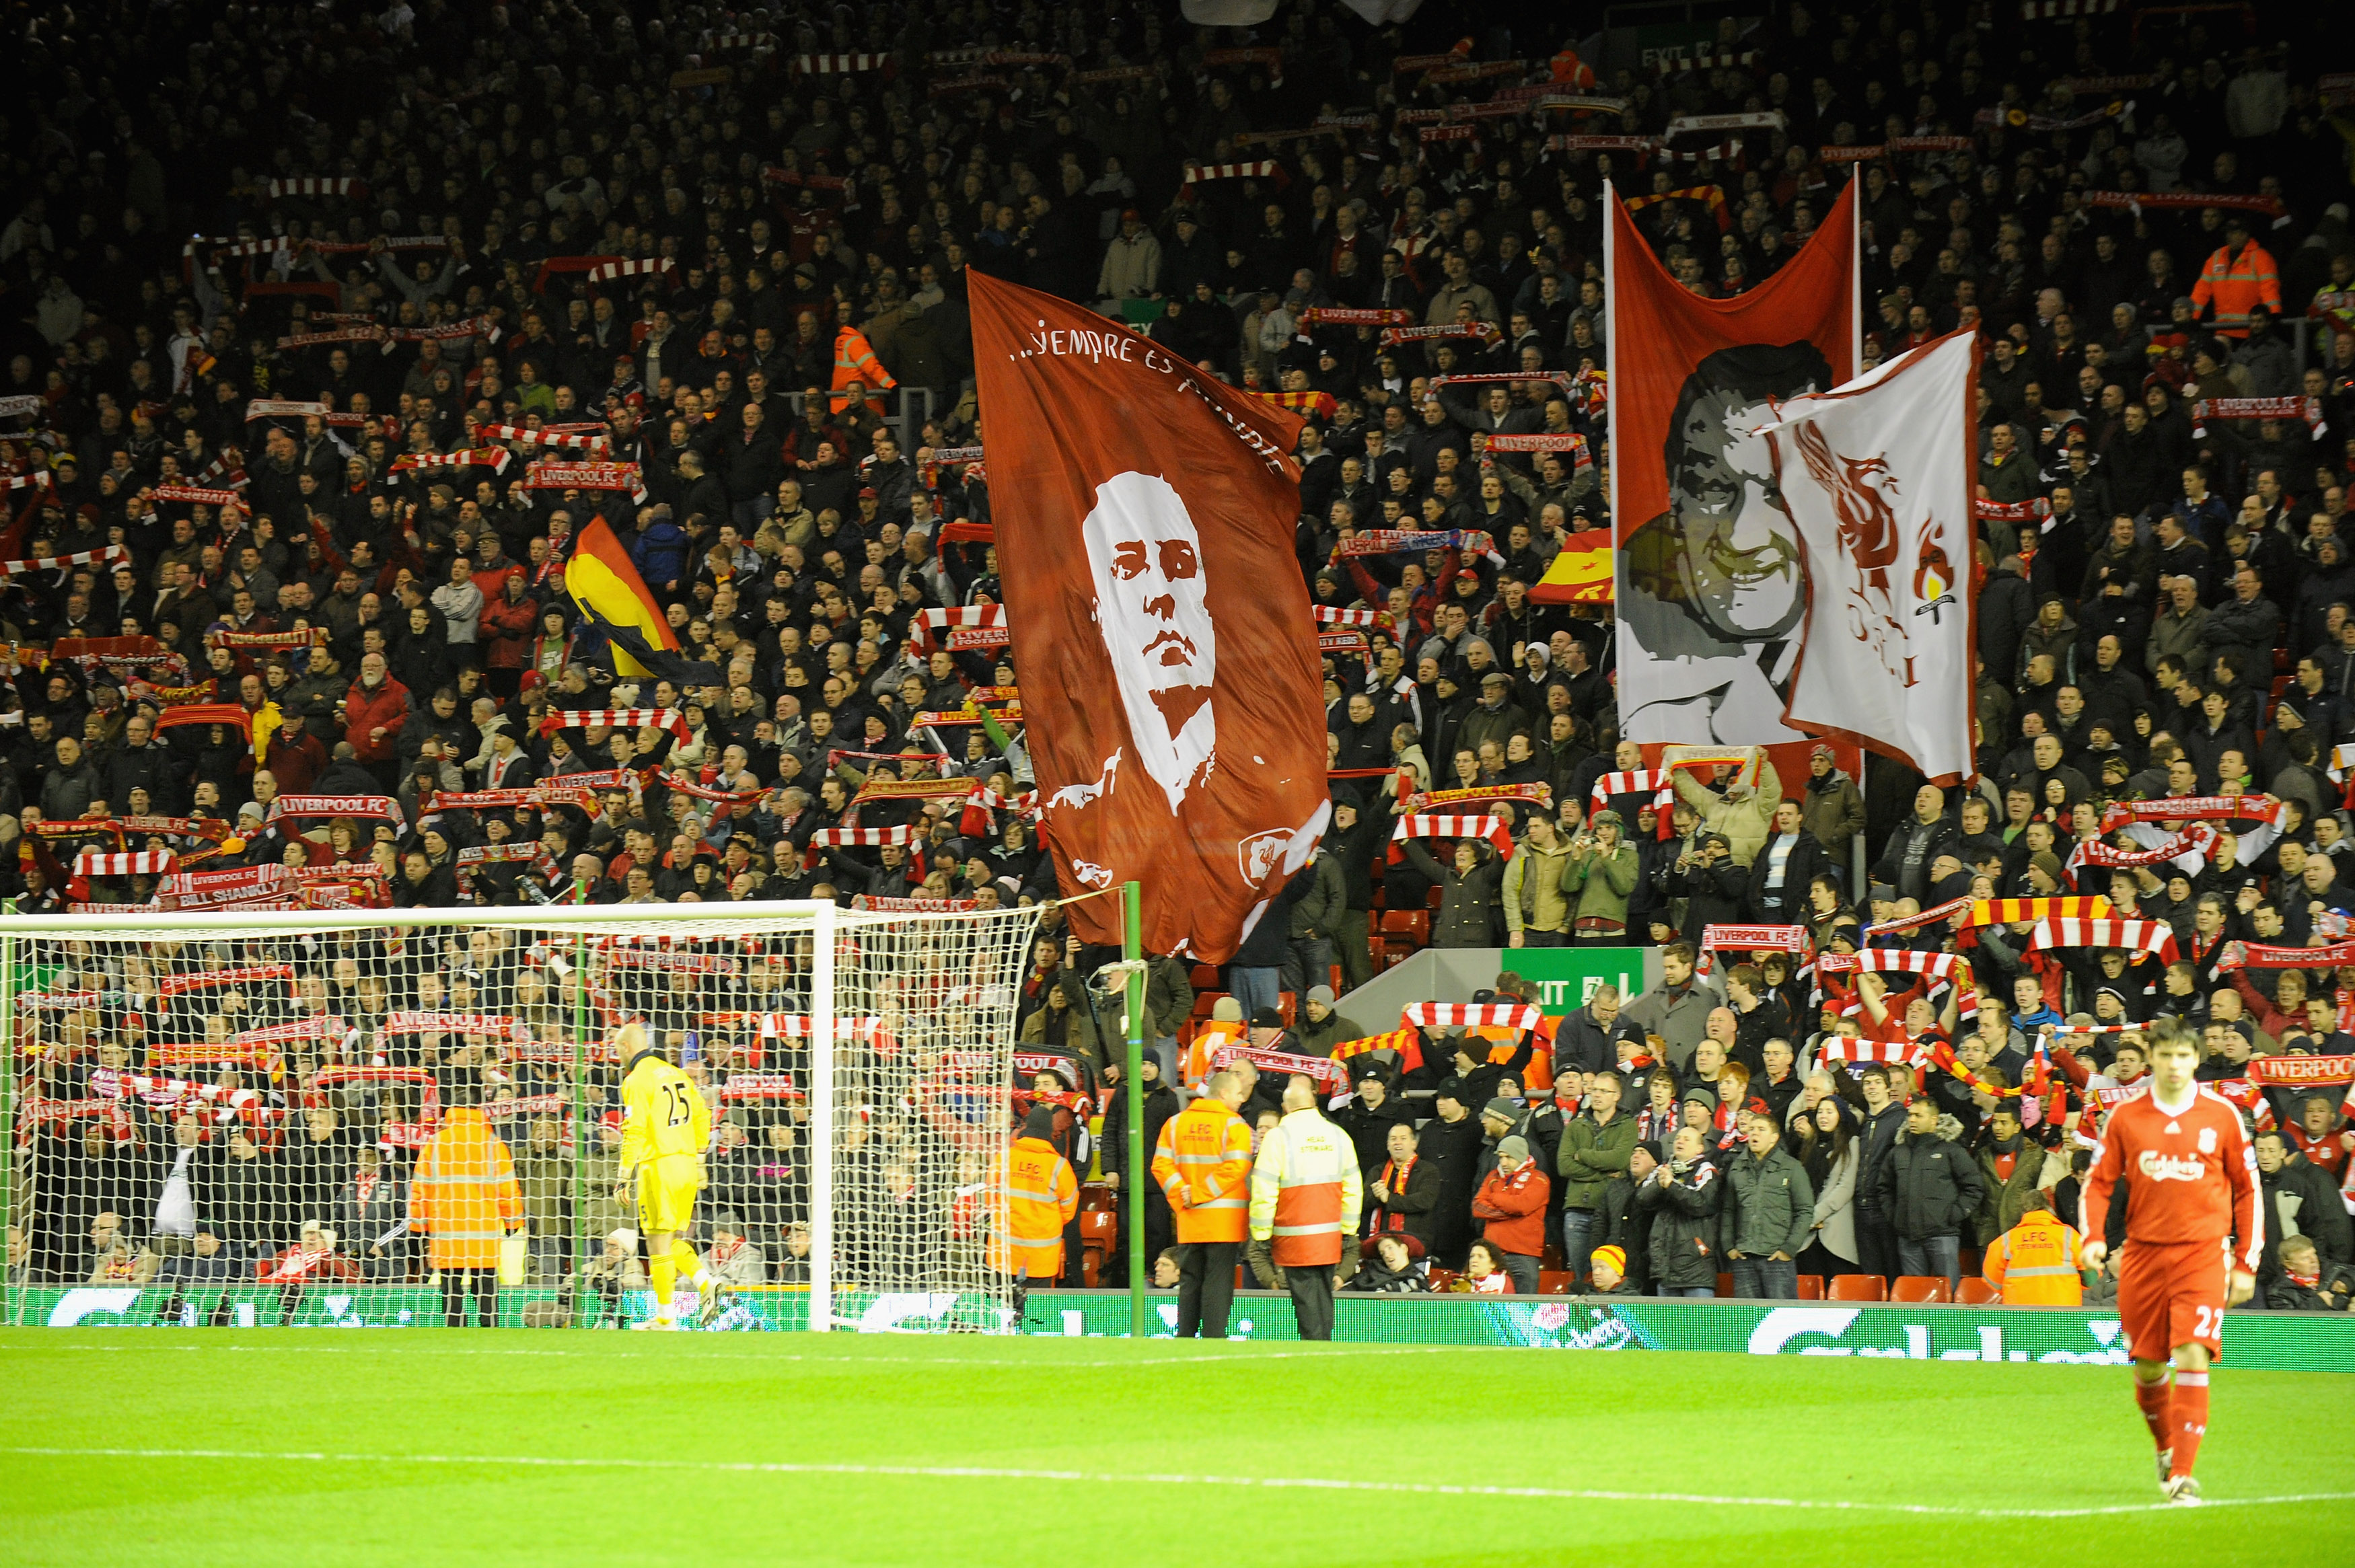 LIVERPOOL, ENGLAND - JANUARY 20:  Liverpool fans on their Kop display flags of Rafael Benitez and Bob Paisley during the Barclays Premier League match between Liverpool and Tottenham Hotspur at Anfield on January 20, 2010 in Liverpool, England.  (Photo by